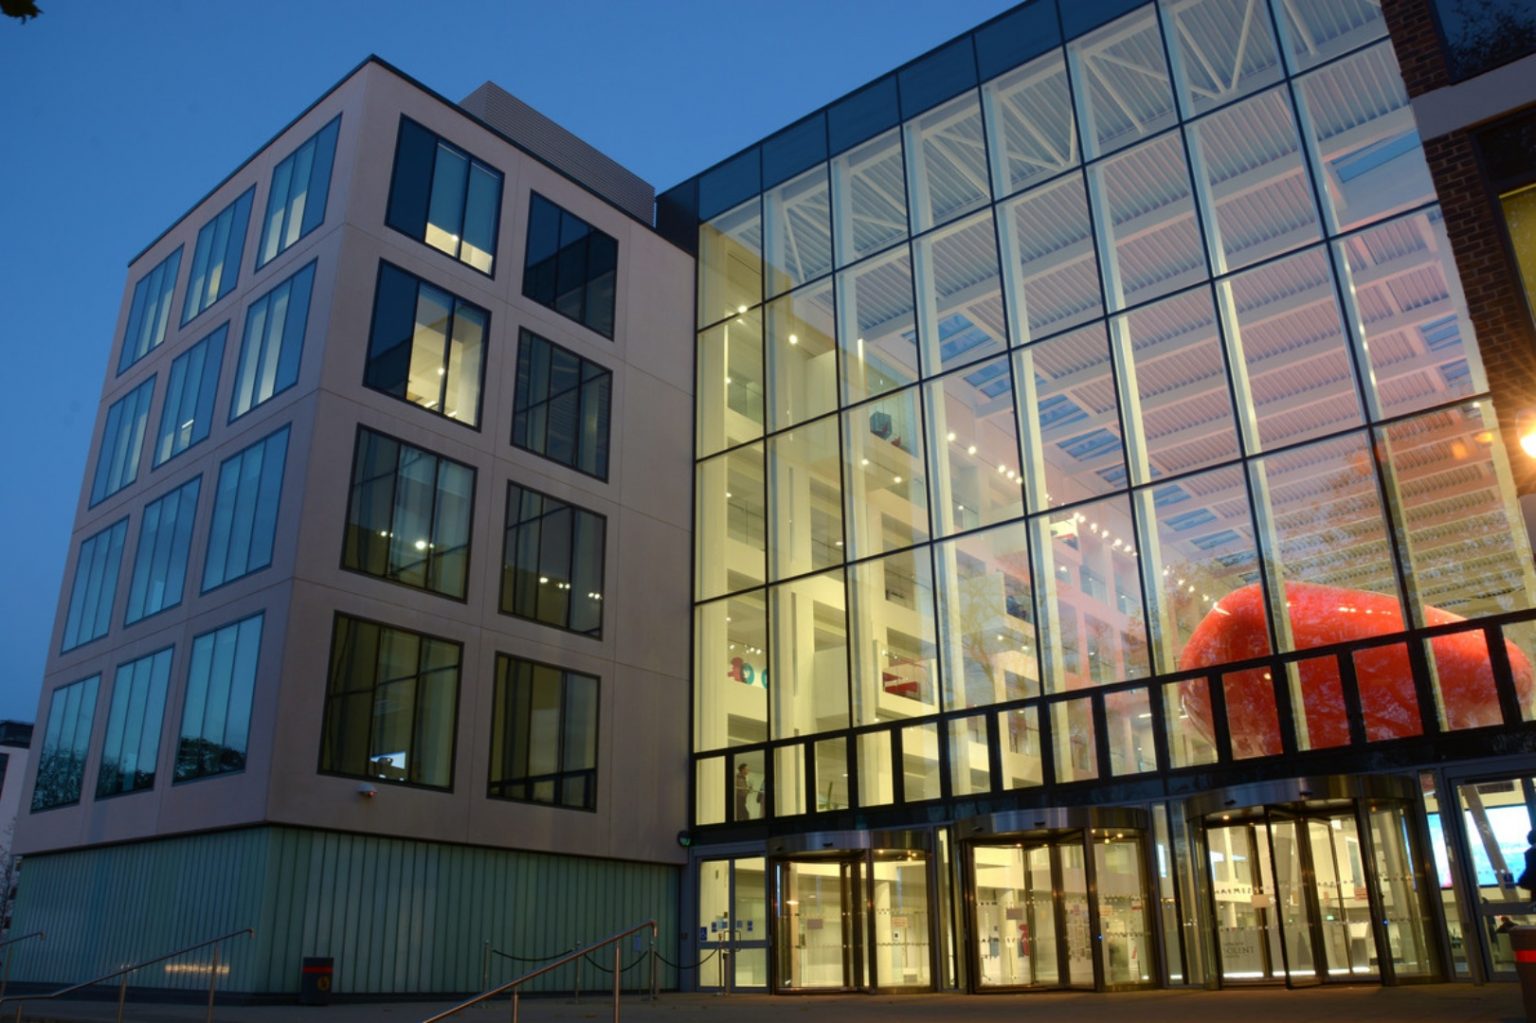 Solent University is fourth in the sector for graduate startups